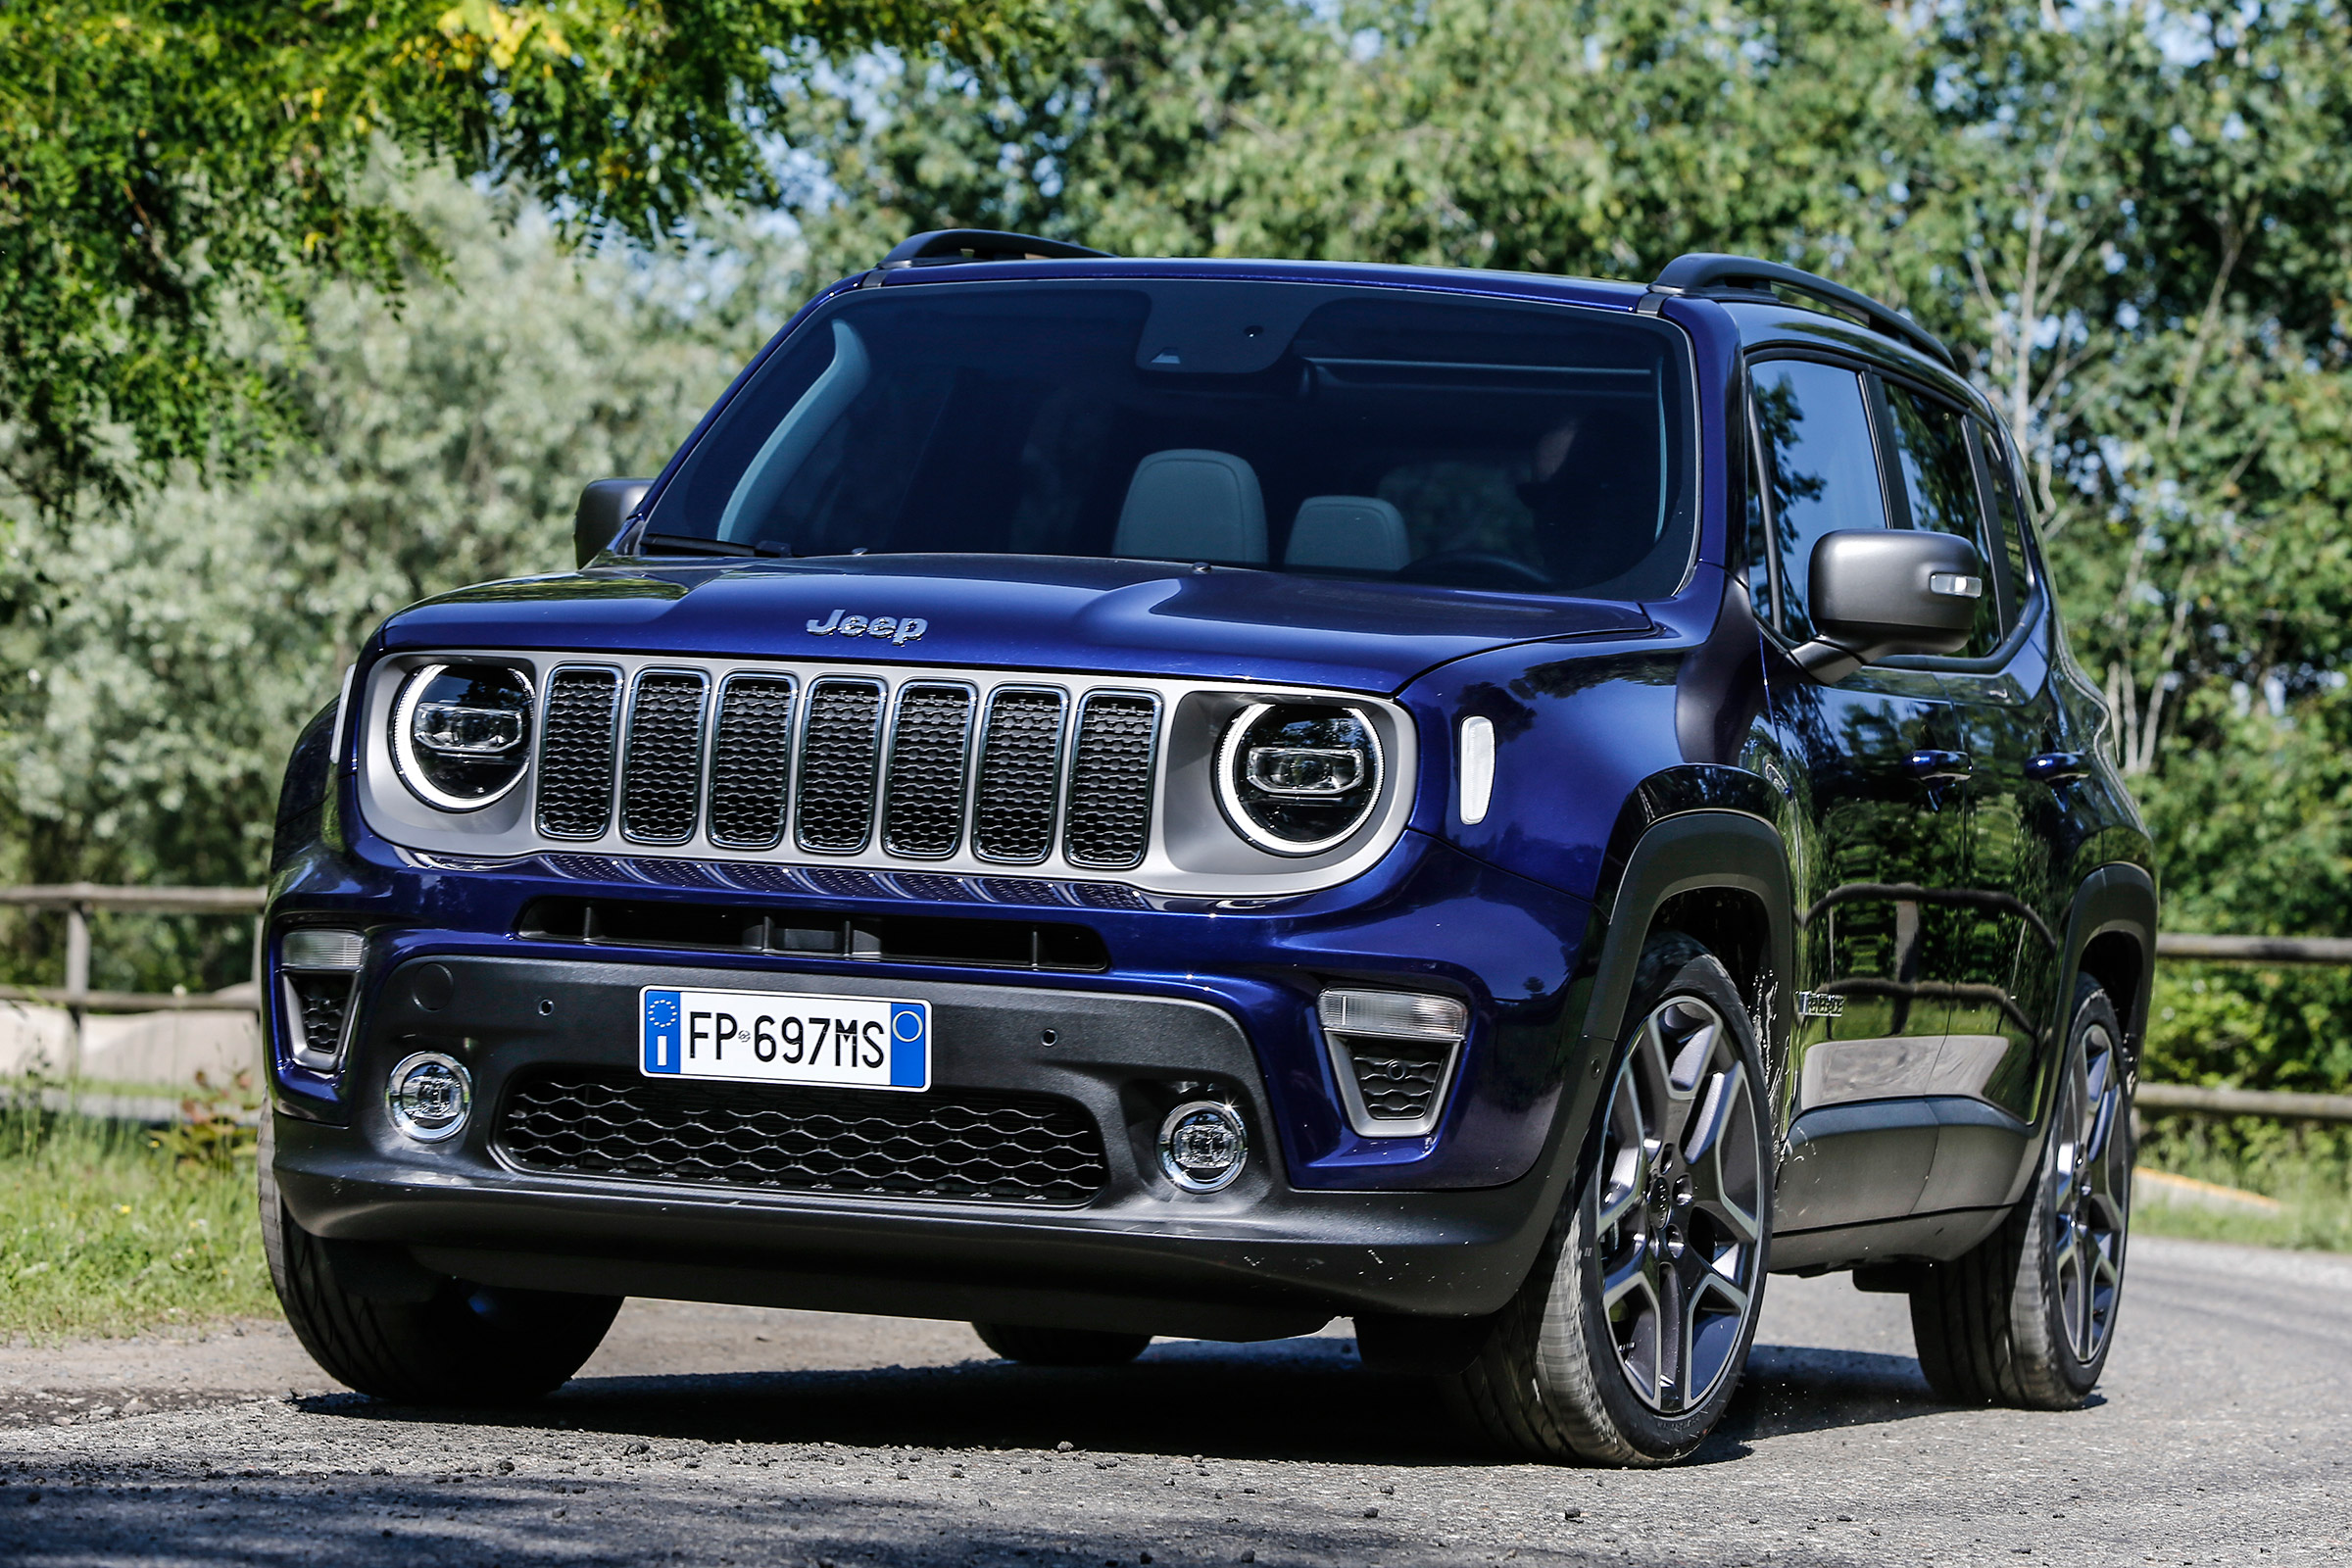 New 2018 Jeep Renegade facelift UK prices and specs